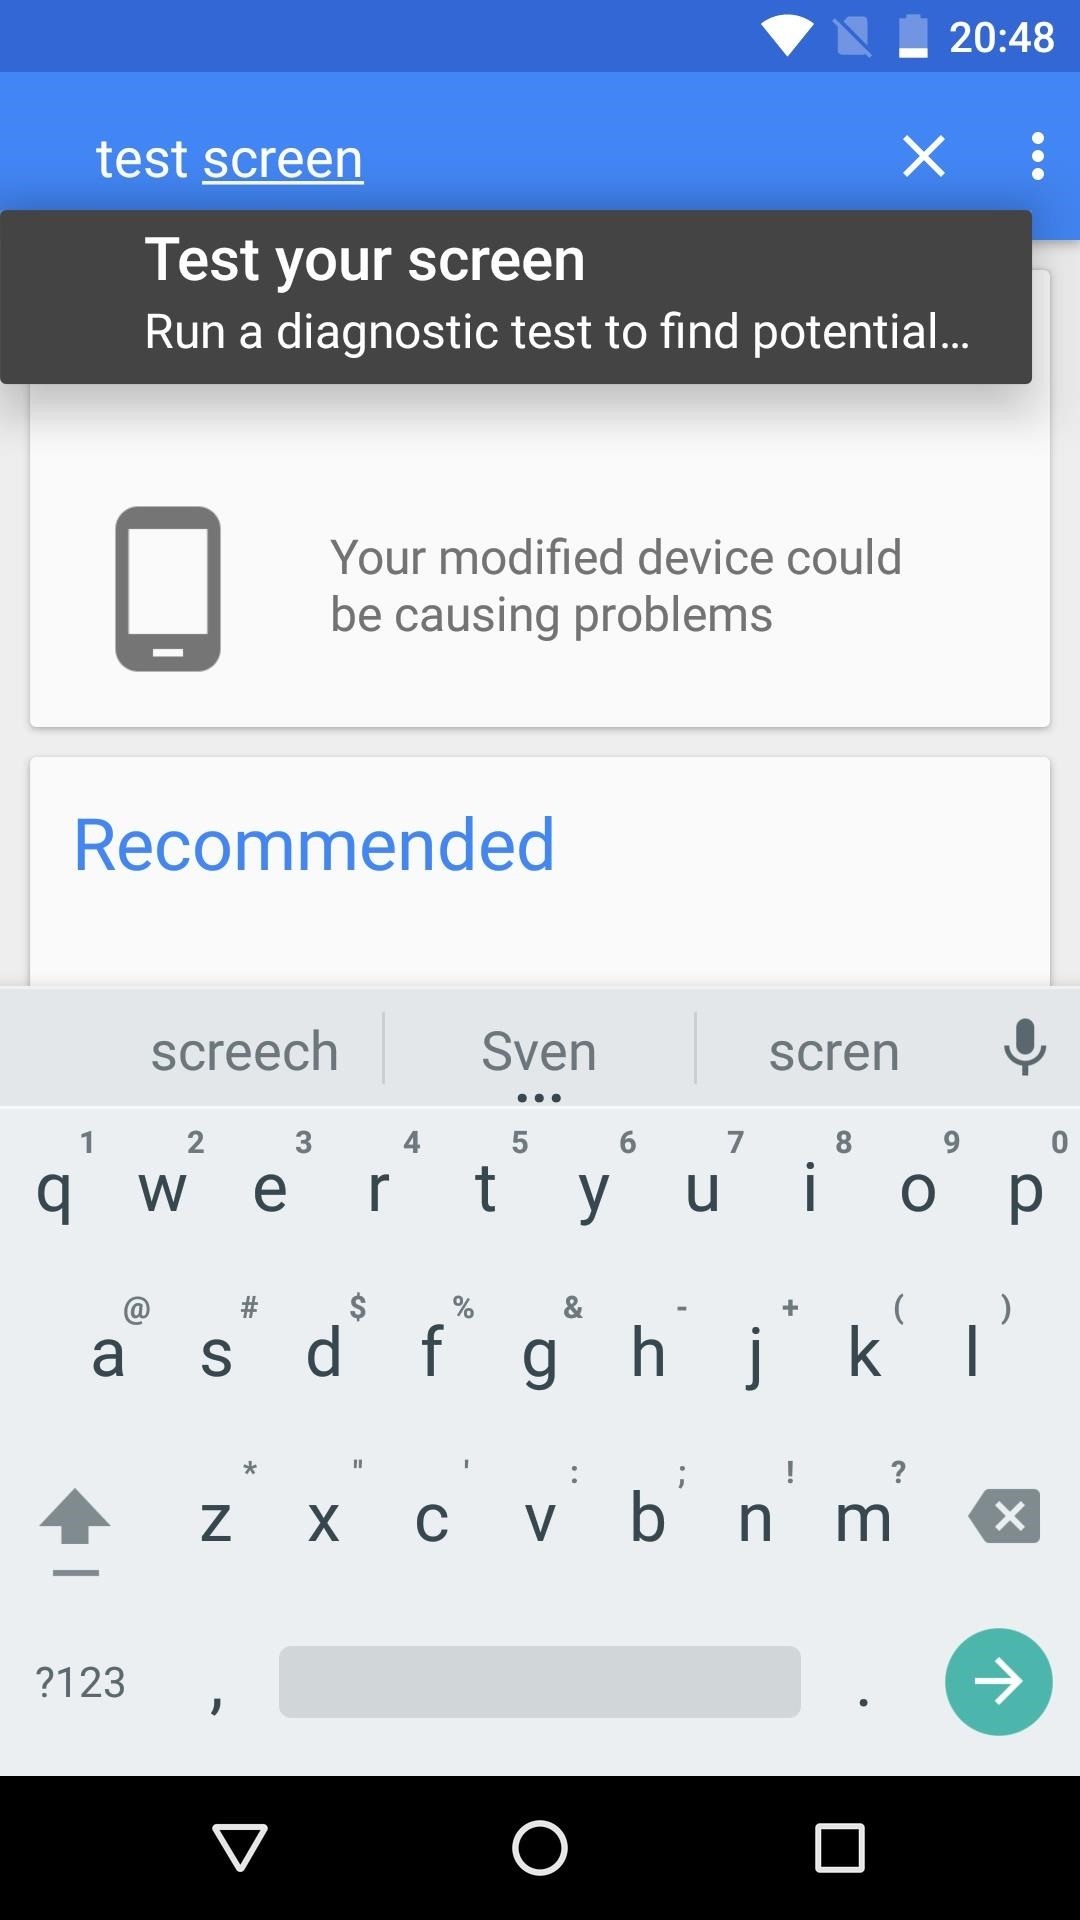 This Google App Makes Sure Your Device Runs Smooth All the Time